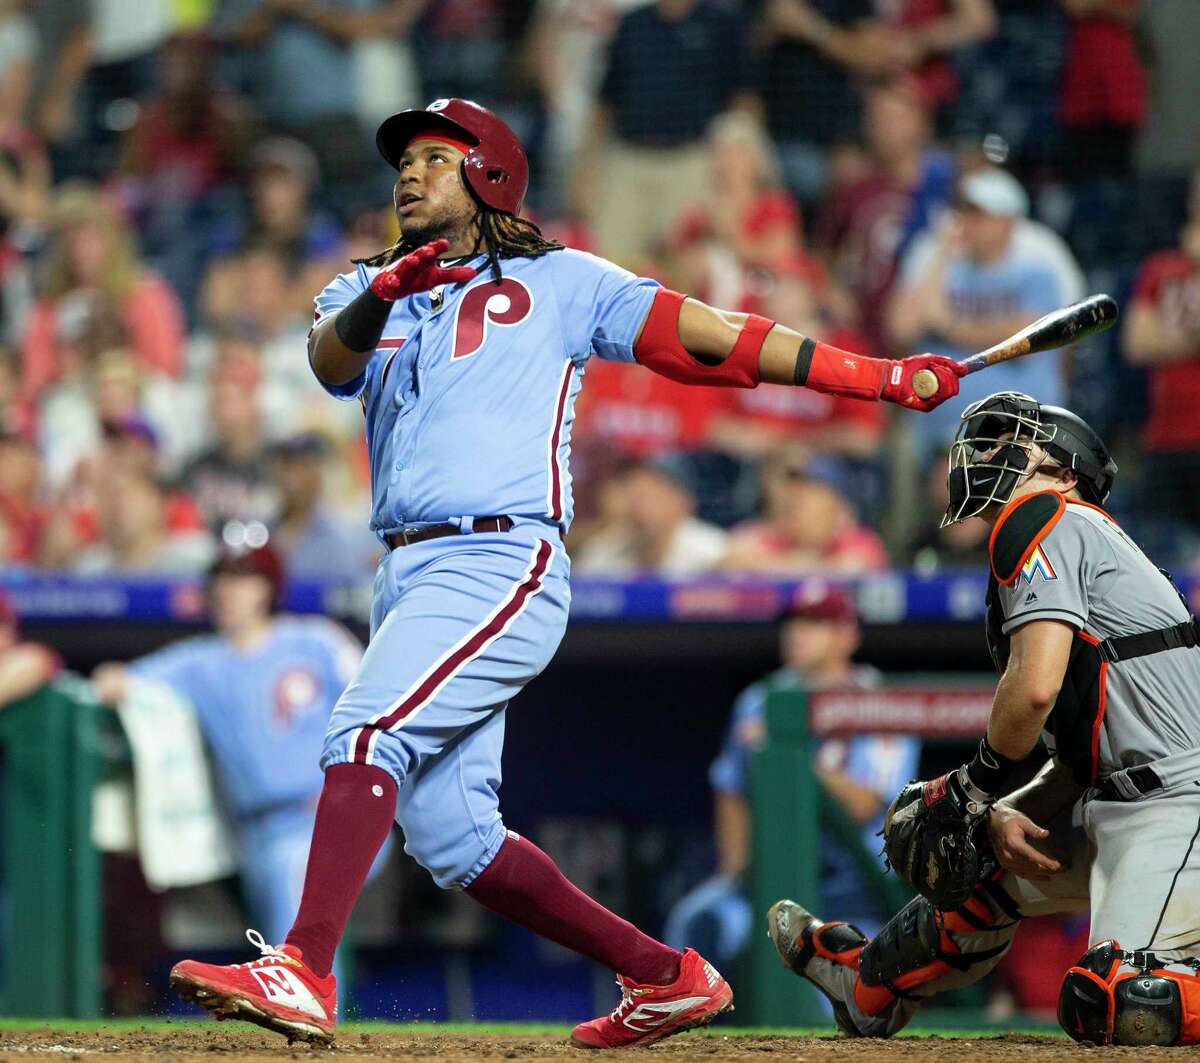 Philadelphia Phillies' Maikel Franco (7) watches his walk-off three-run home run against the Miami Marlins in a baseball game Thursday, Aug. 2, 2018, in Philadelphia. The Phillies won 5-2. (AP Photo/Laurence Kesterson)